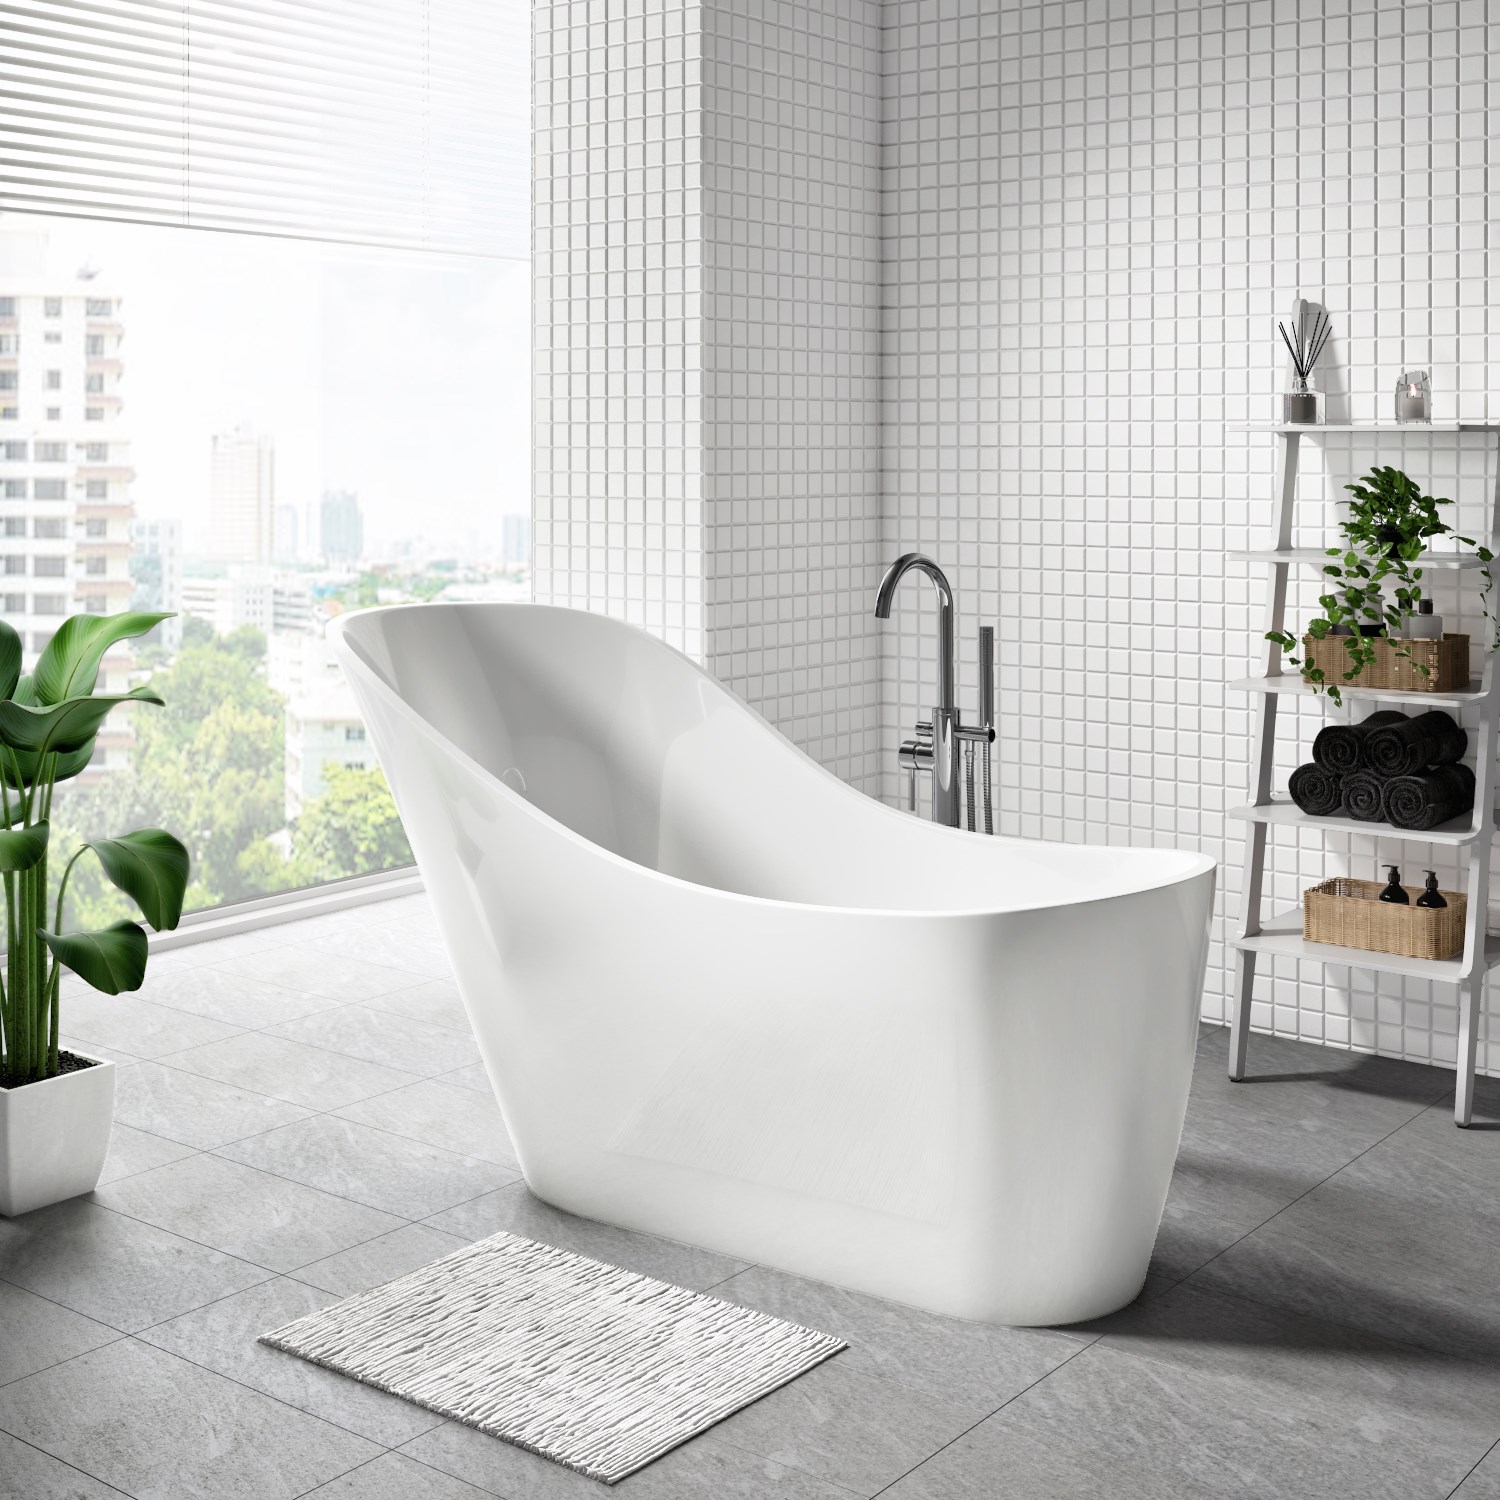 Compact bath needed for a small bathroom? Check these out